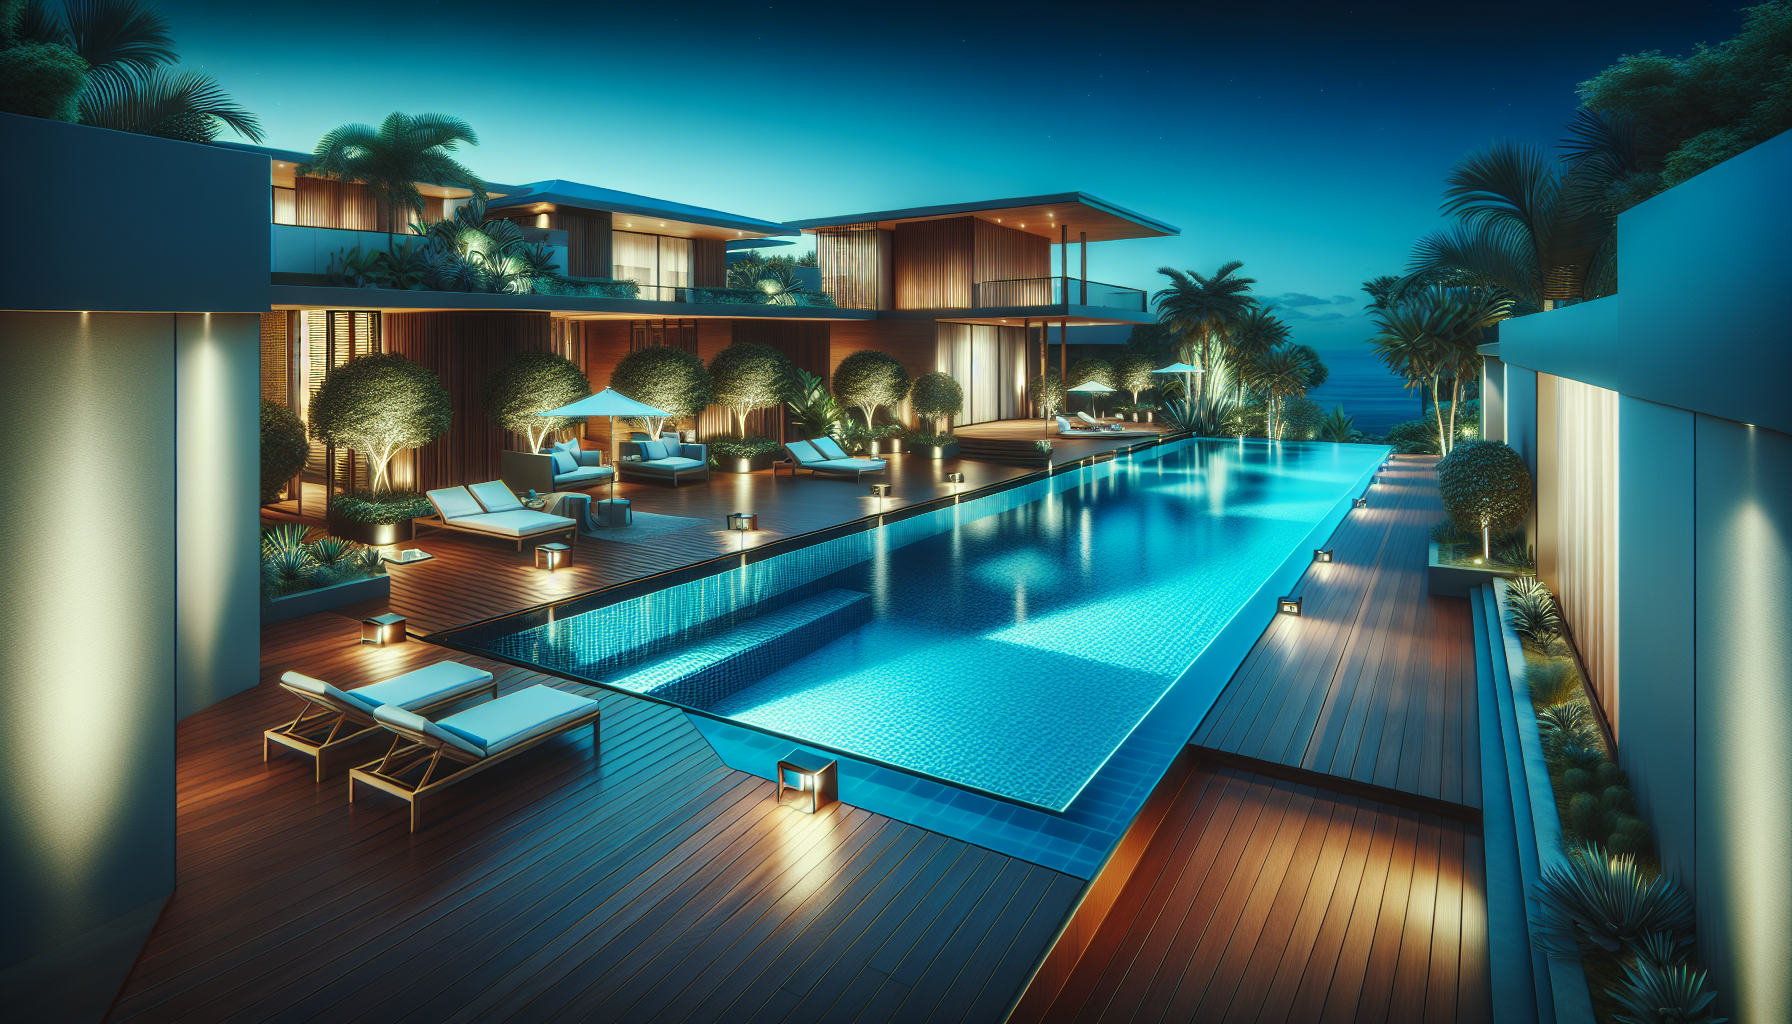 An illustration of a luxurious swimming pool with a surrounding pool deck